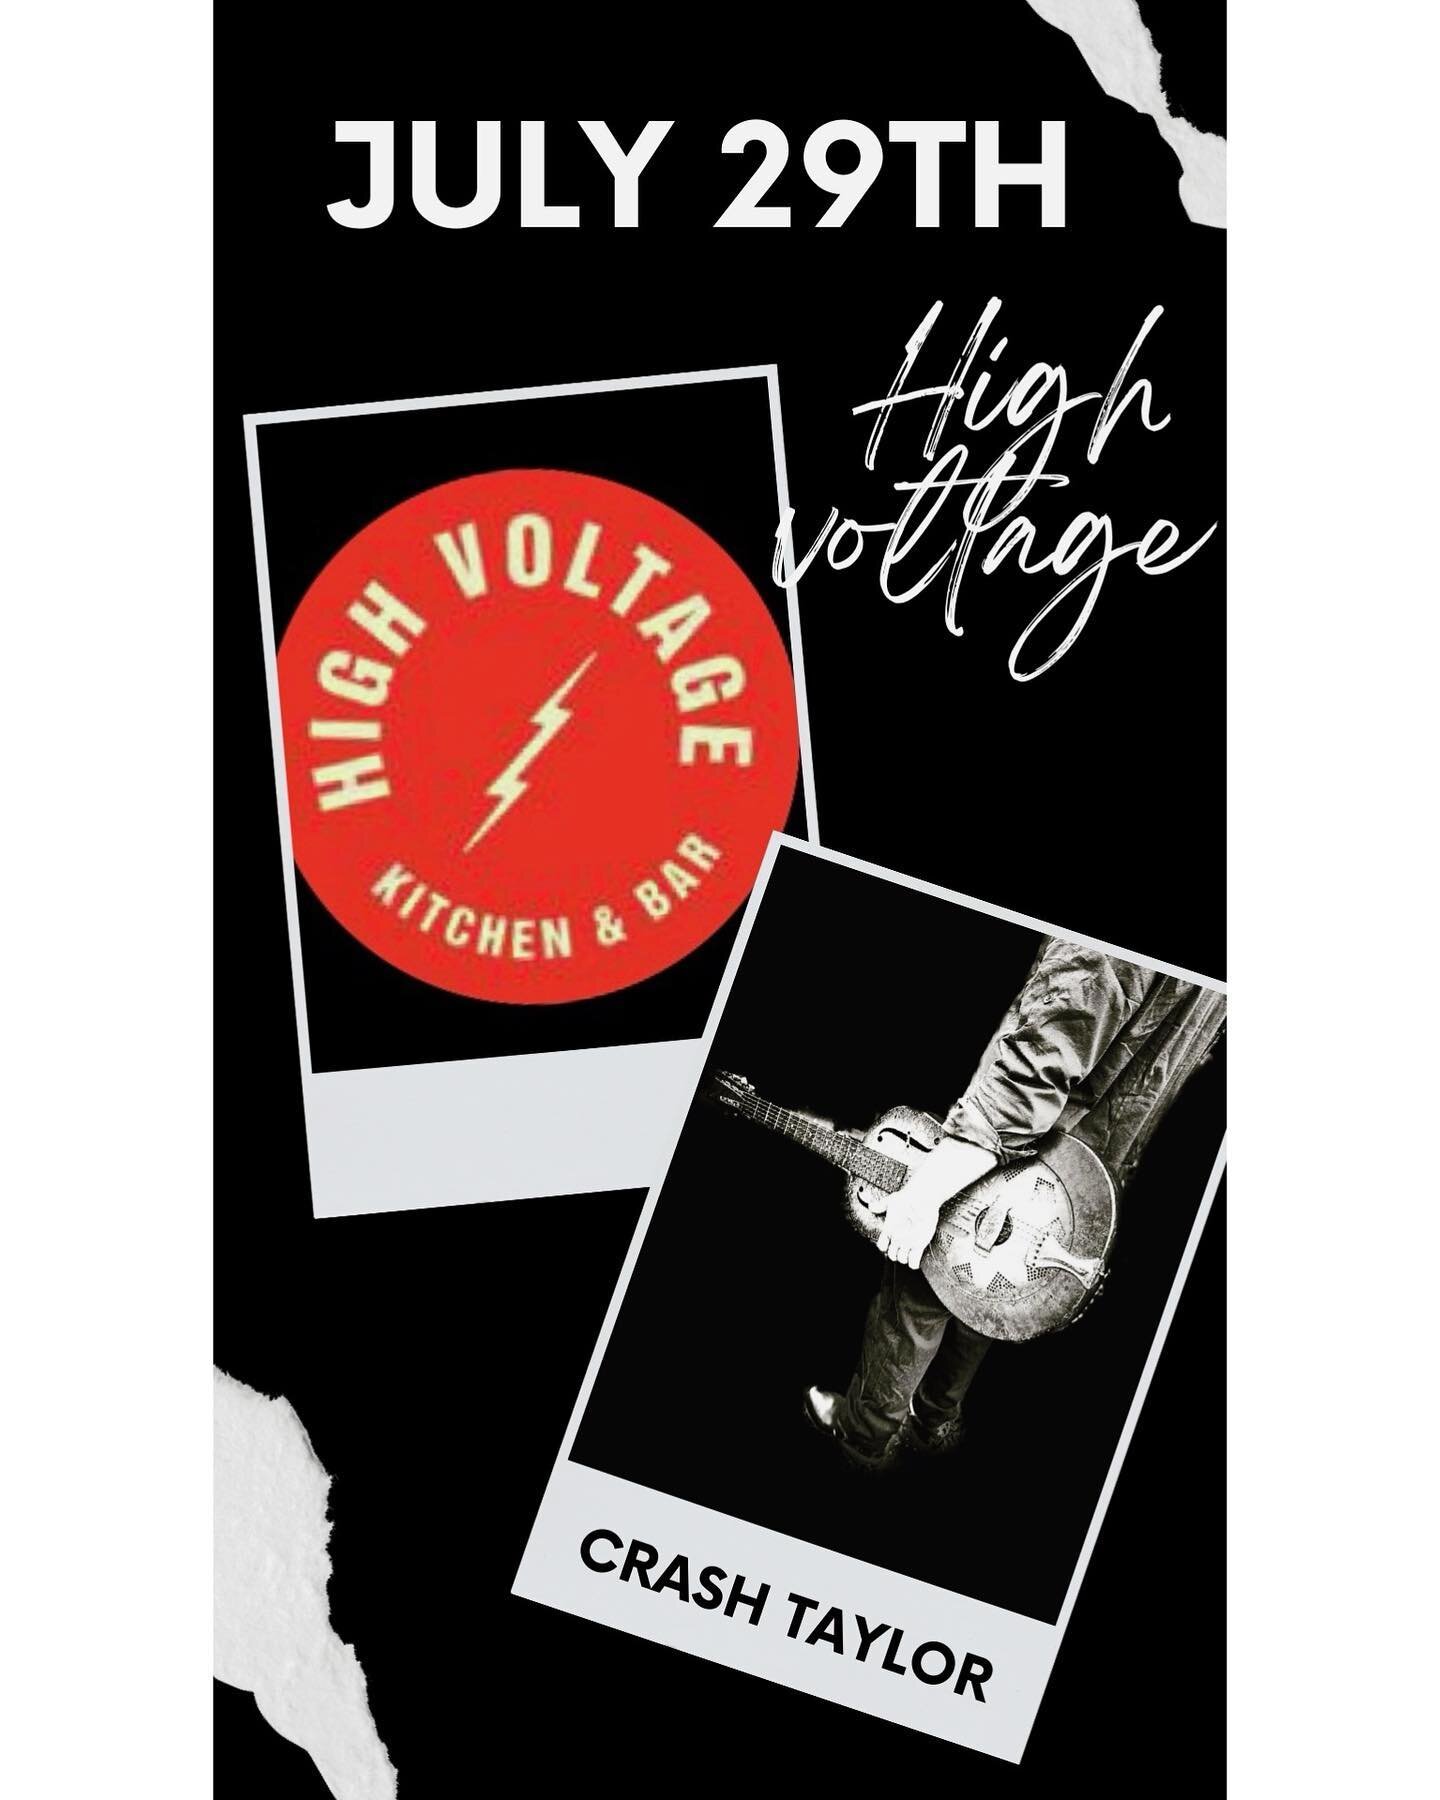 Save the date- creekside bar- summer eve of original music by multi instrumentalist and singer Crash Taylor. Hear the new album &ldquo;Retired Outlaw&rdquo; live and grab his latest novel while you&rsquo;re at it&hellip;&rdquo;PotDotCom&rdquo;